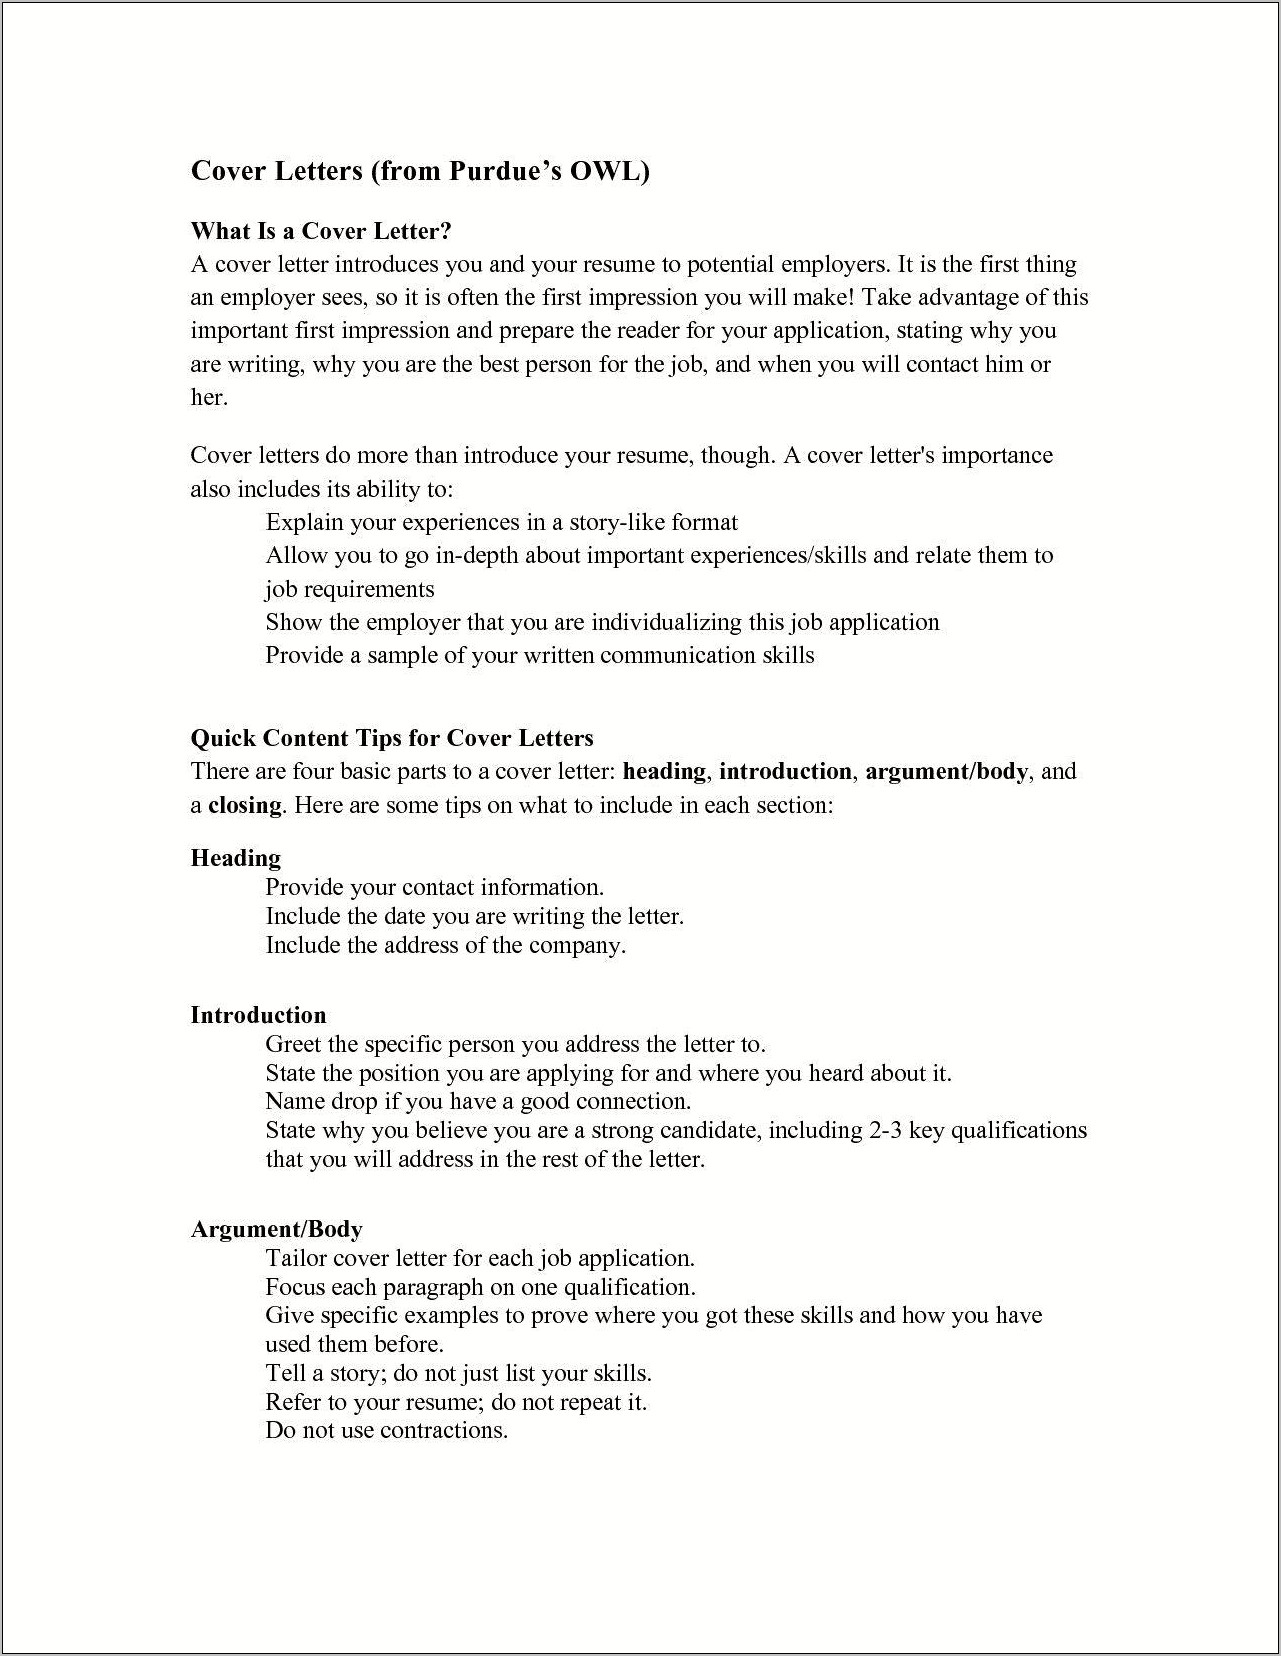 Resume Cover Letter Examples Purdue Owl